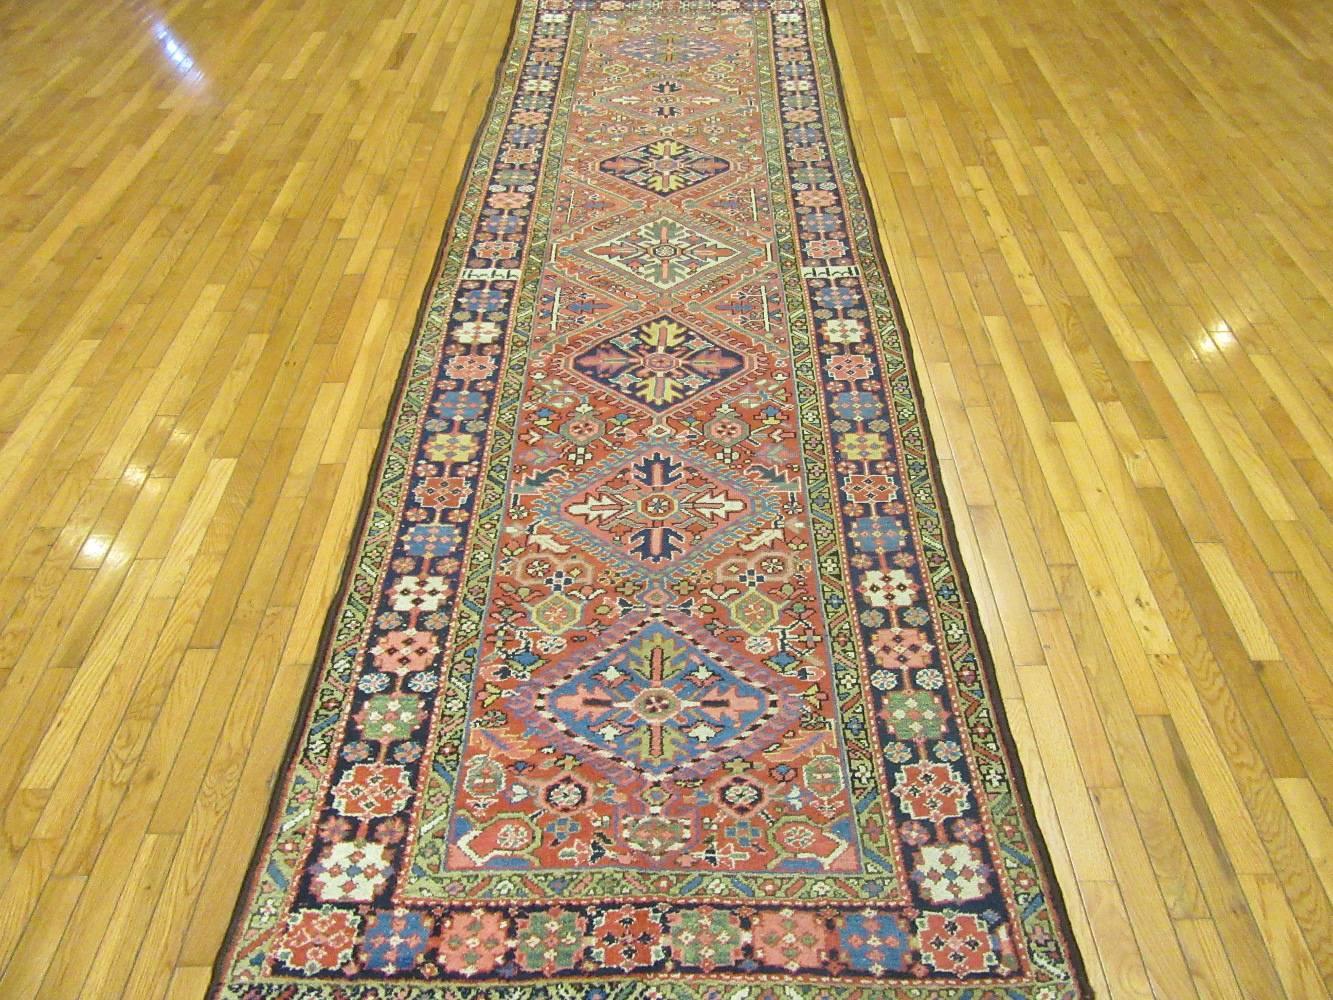 This is a hand-knotted antique genuine Persian Heriz runner rug. It has the colors and design that has made Heriz rugs a much sought after and popular rugs. It has a date inscribed in the border indicating it was made in 1904 AD (1322 Hijri). It